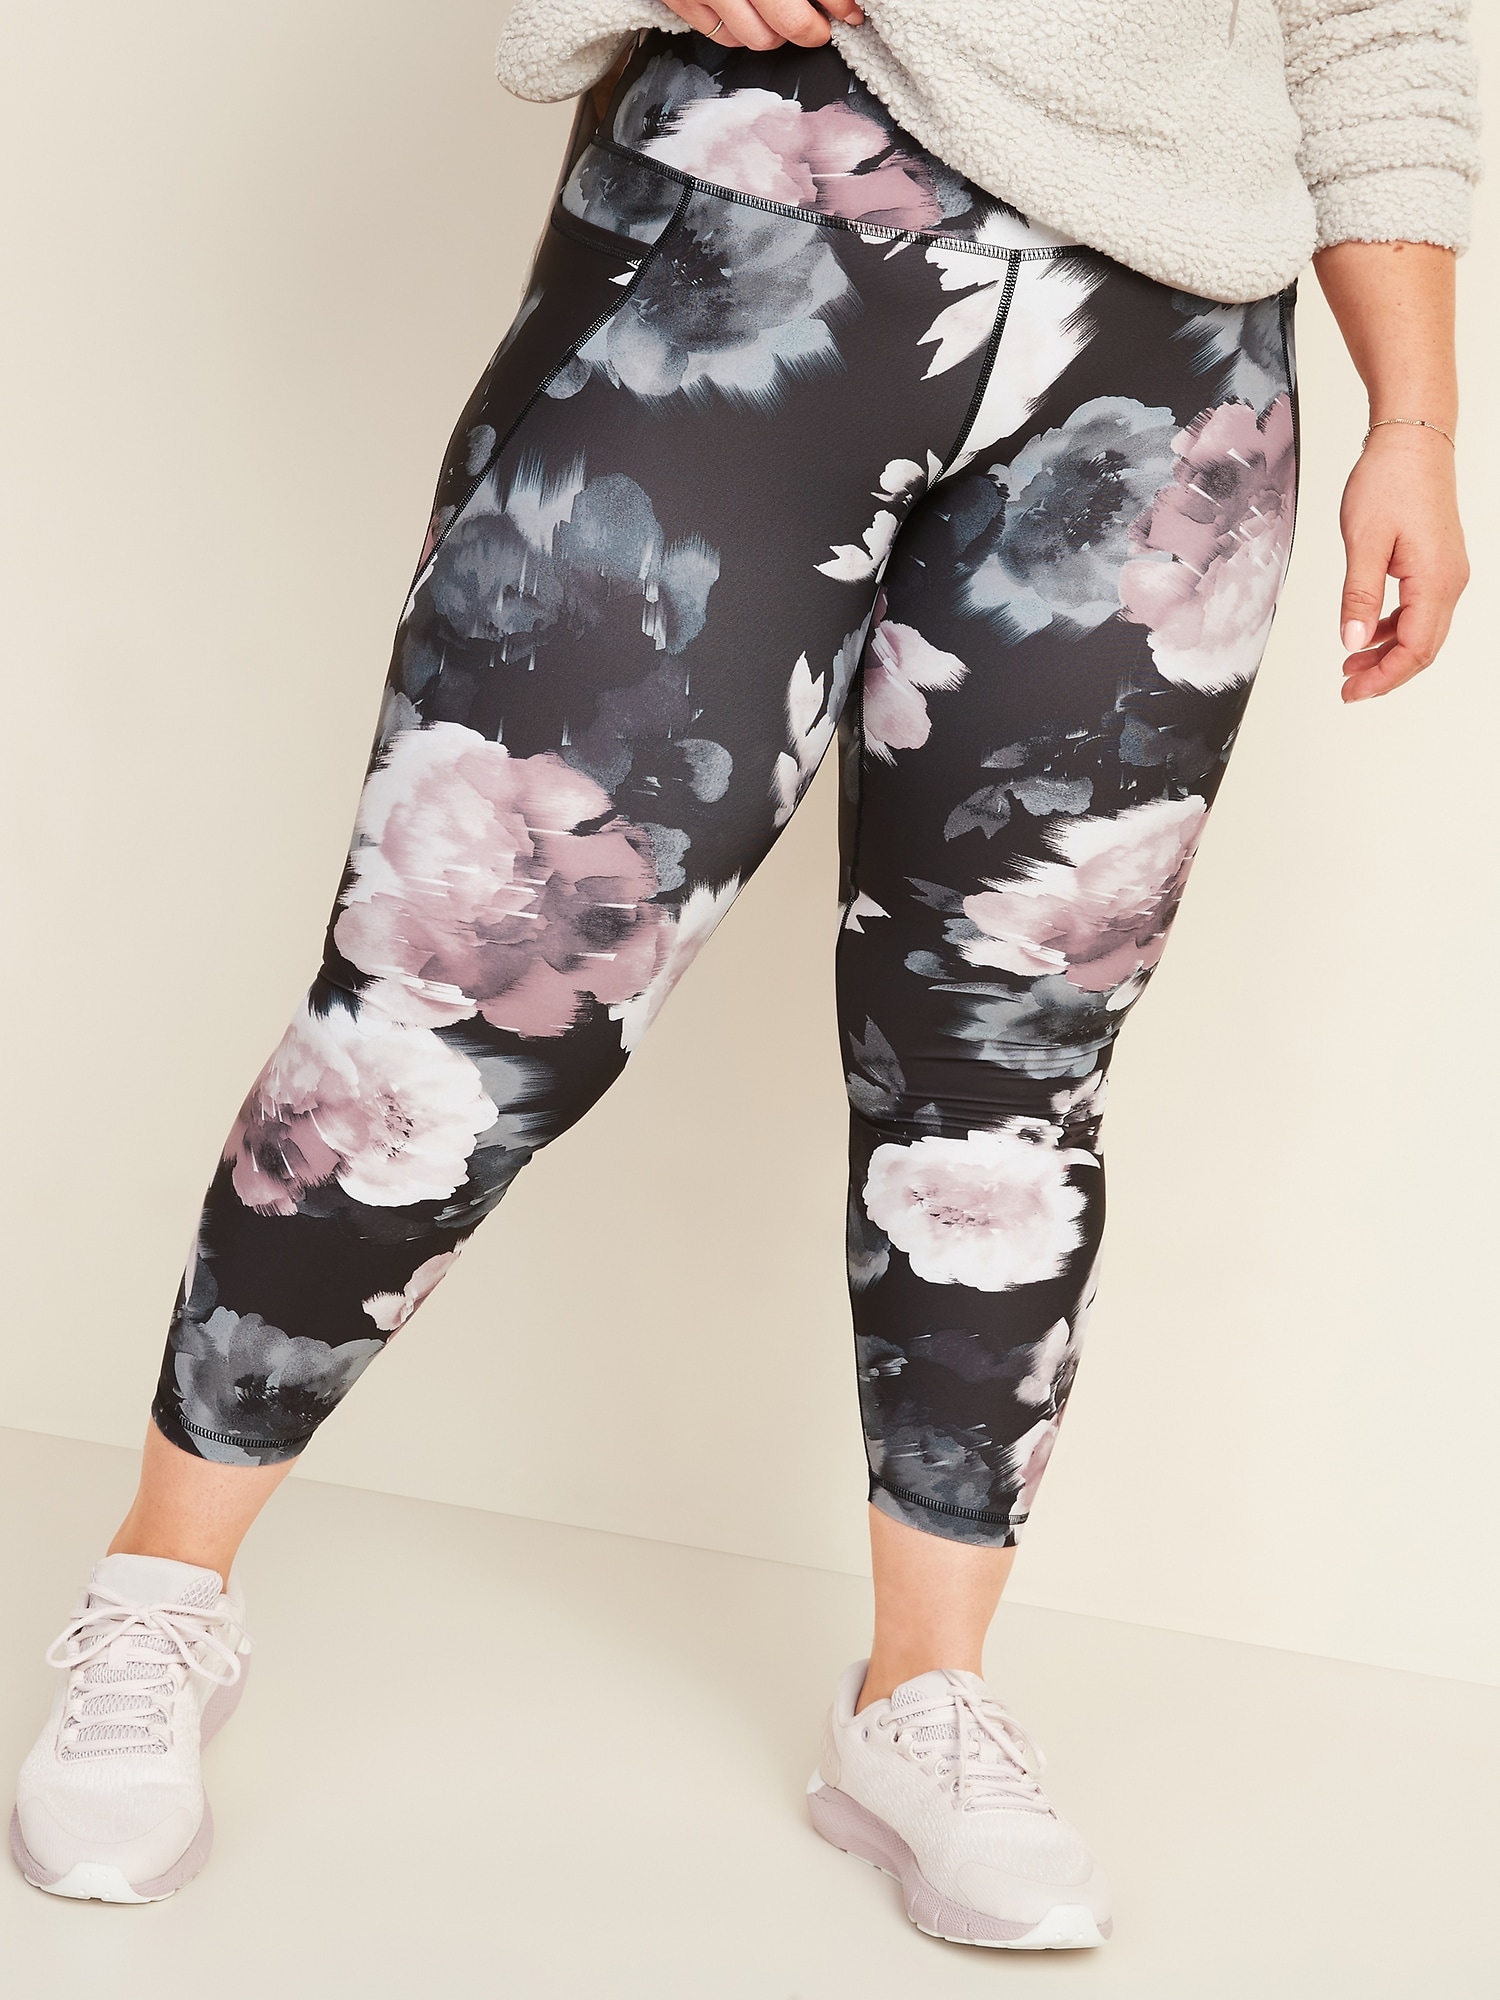 High-Waisted PowerSoft 7/8-Length Plus-Size Leggings